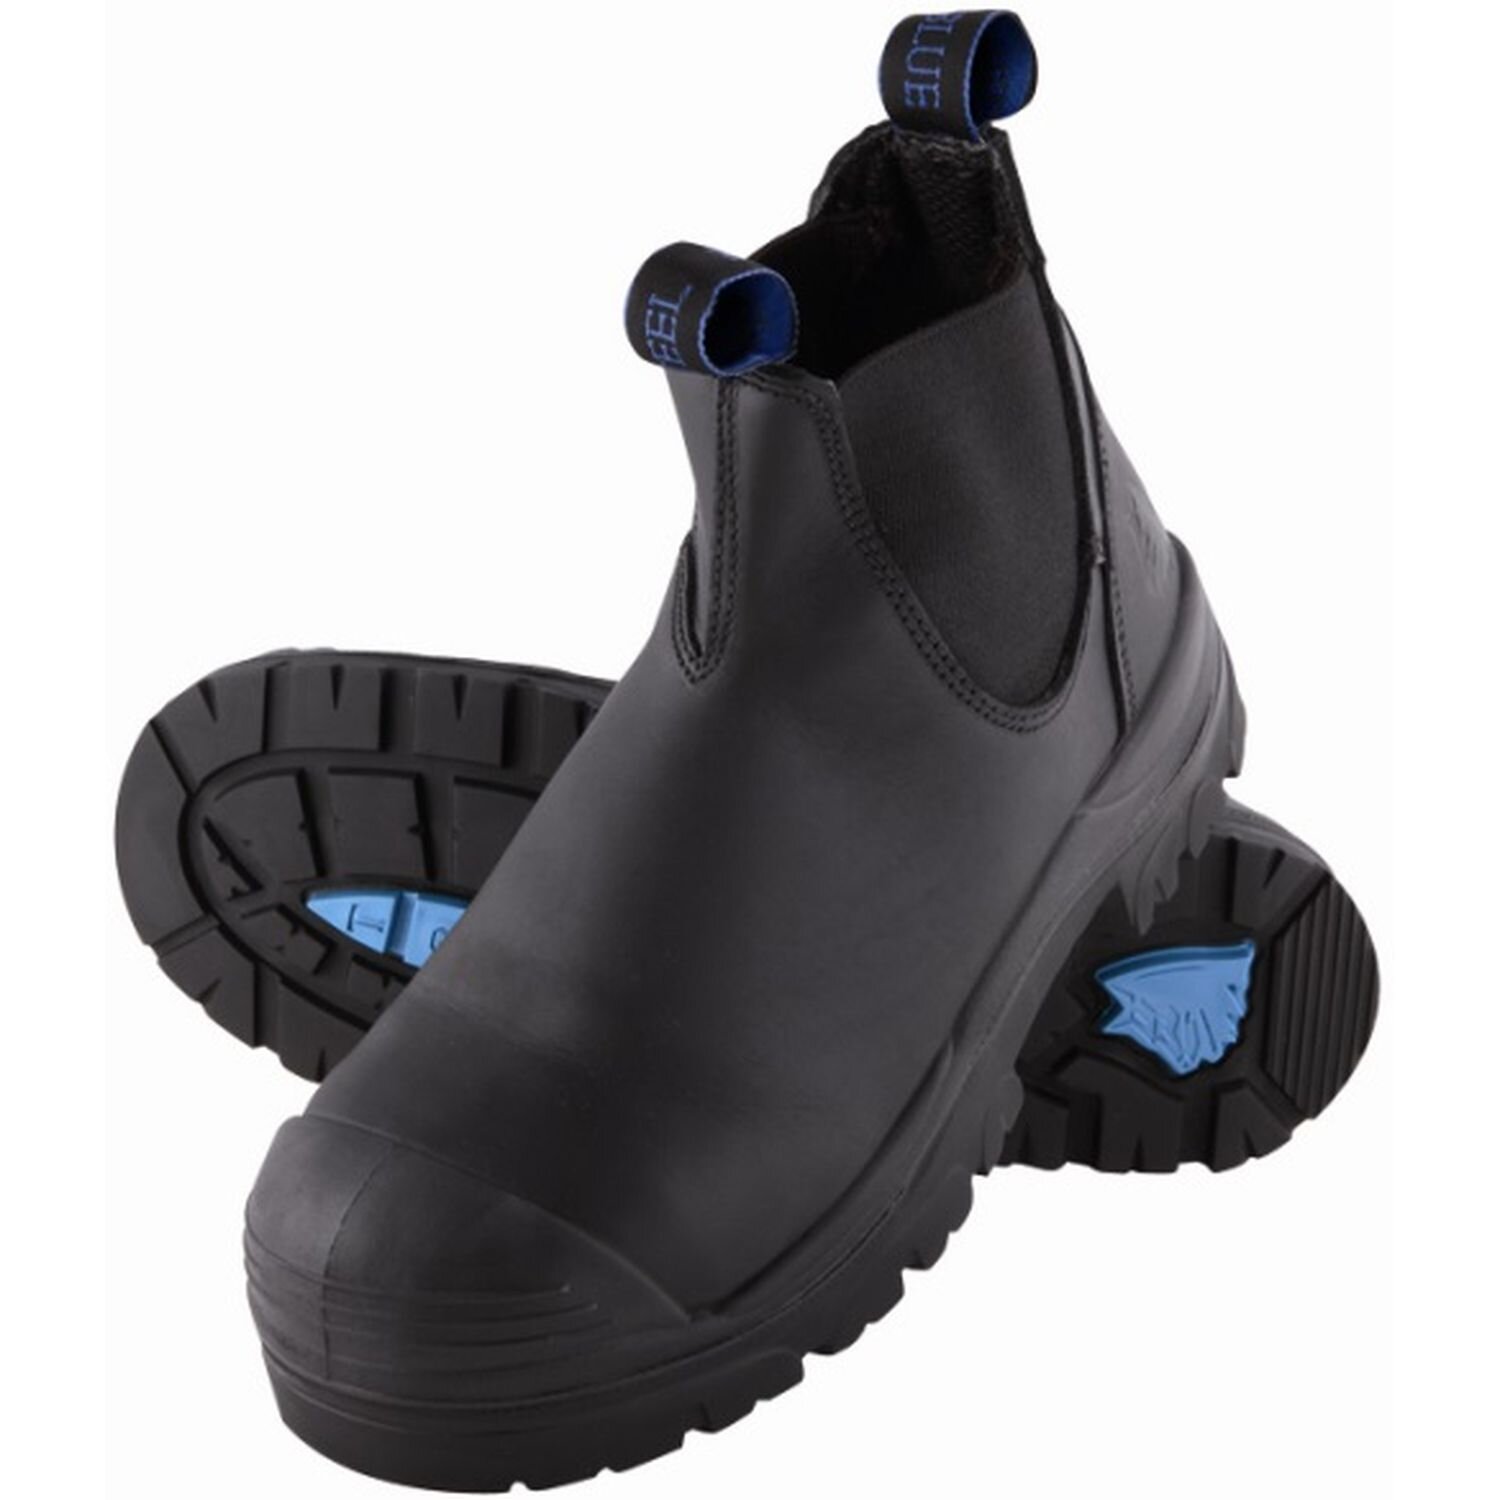 Steel Blue Hobart Slip On Safety Boot With Bump Cap Black